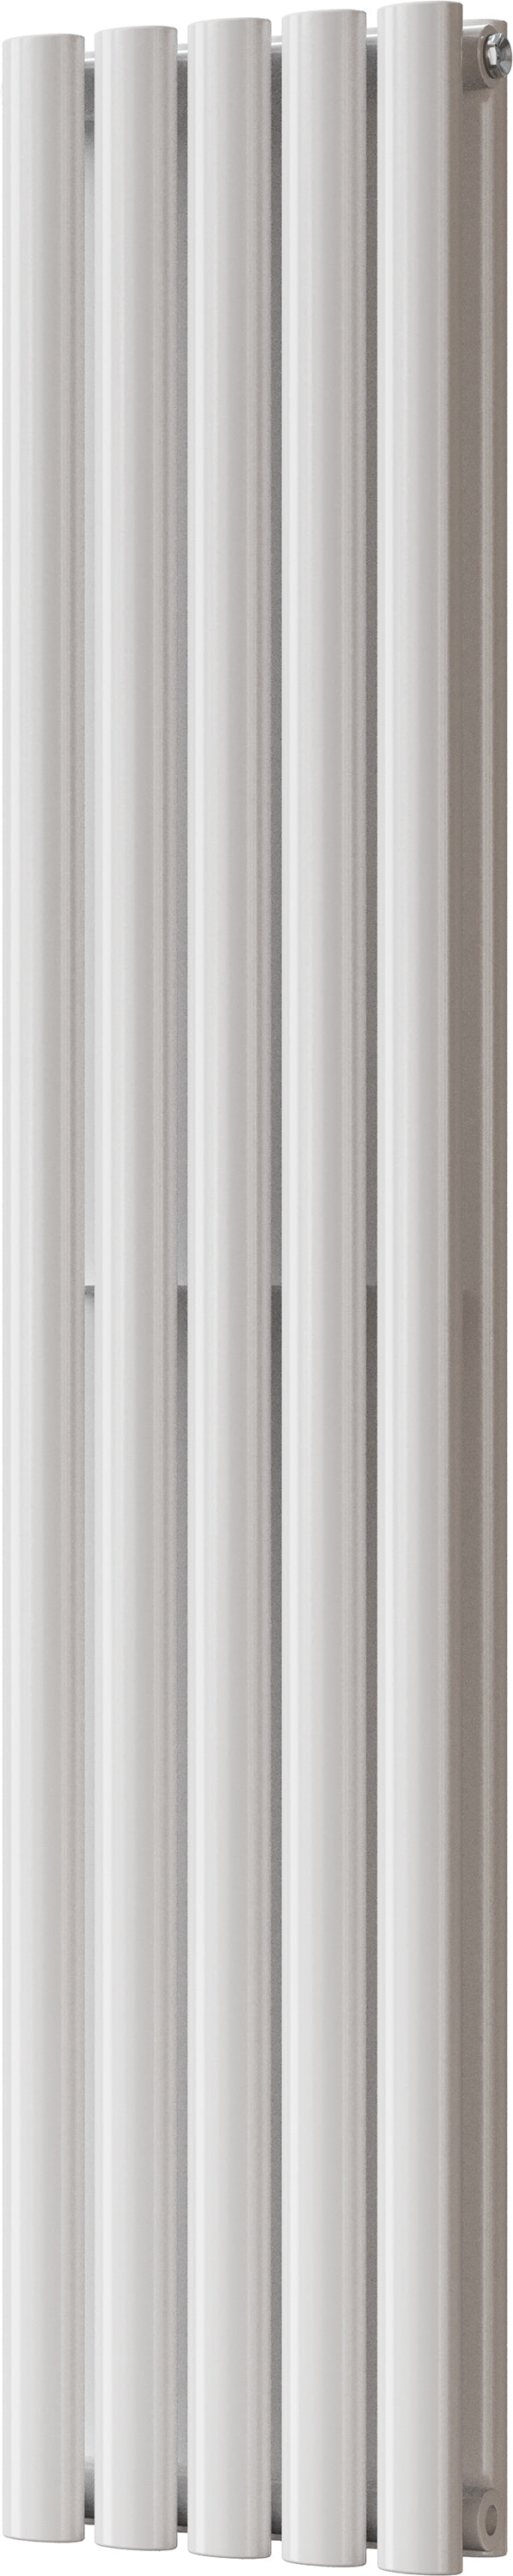 Omeara - White Vertical Radiator H1400mm x W290mm Double Panel